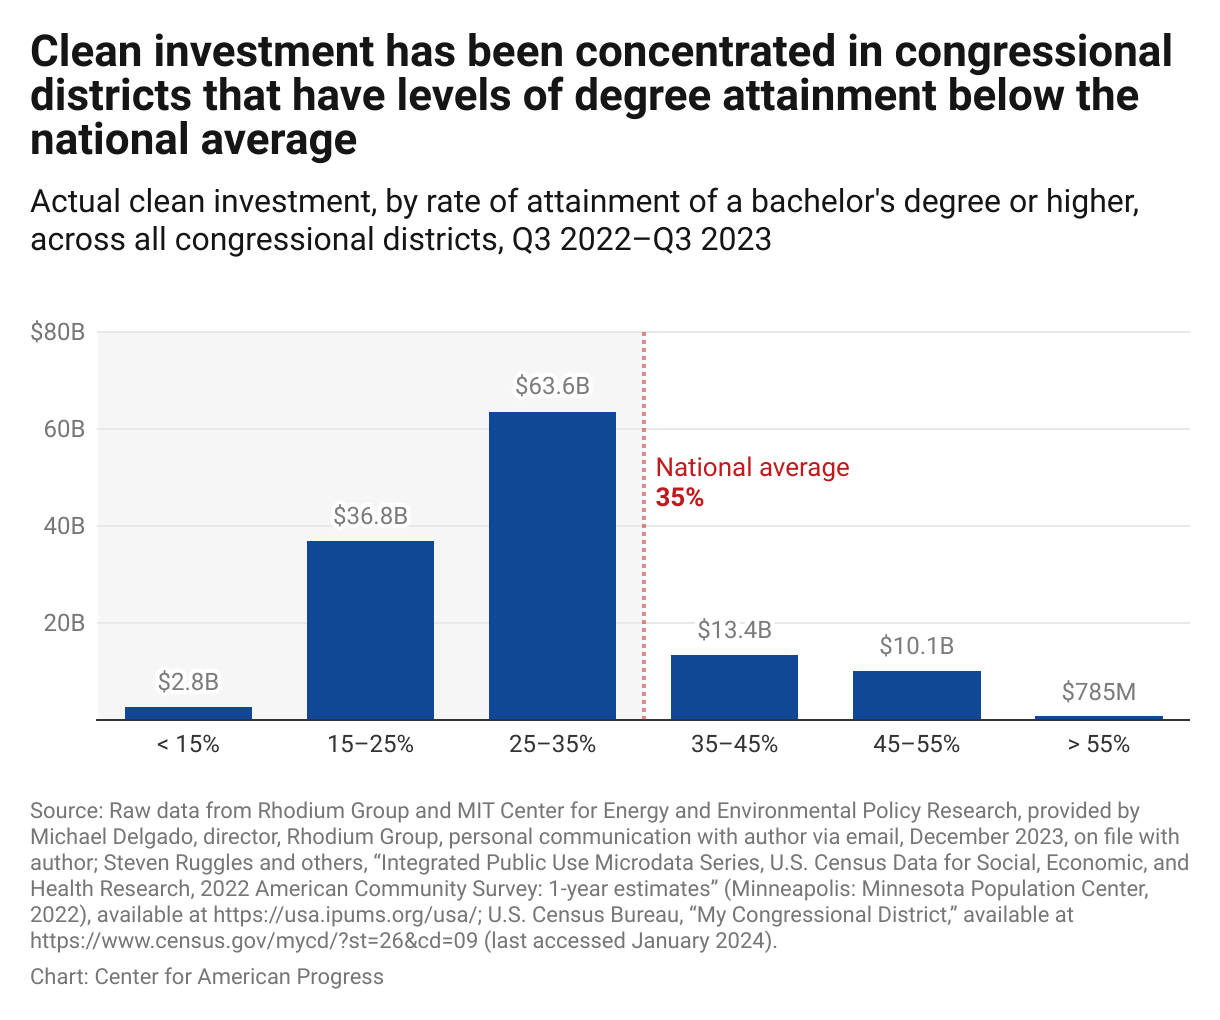 Bar graph that shows how much clean energy investment five percentage ranges of degree attainment received across all congressional districts, with the 15 percent to 25 percent range and 25 percent to 35 percent range receiving the largest share. 